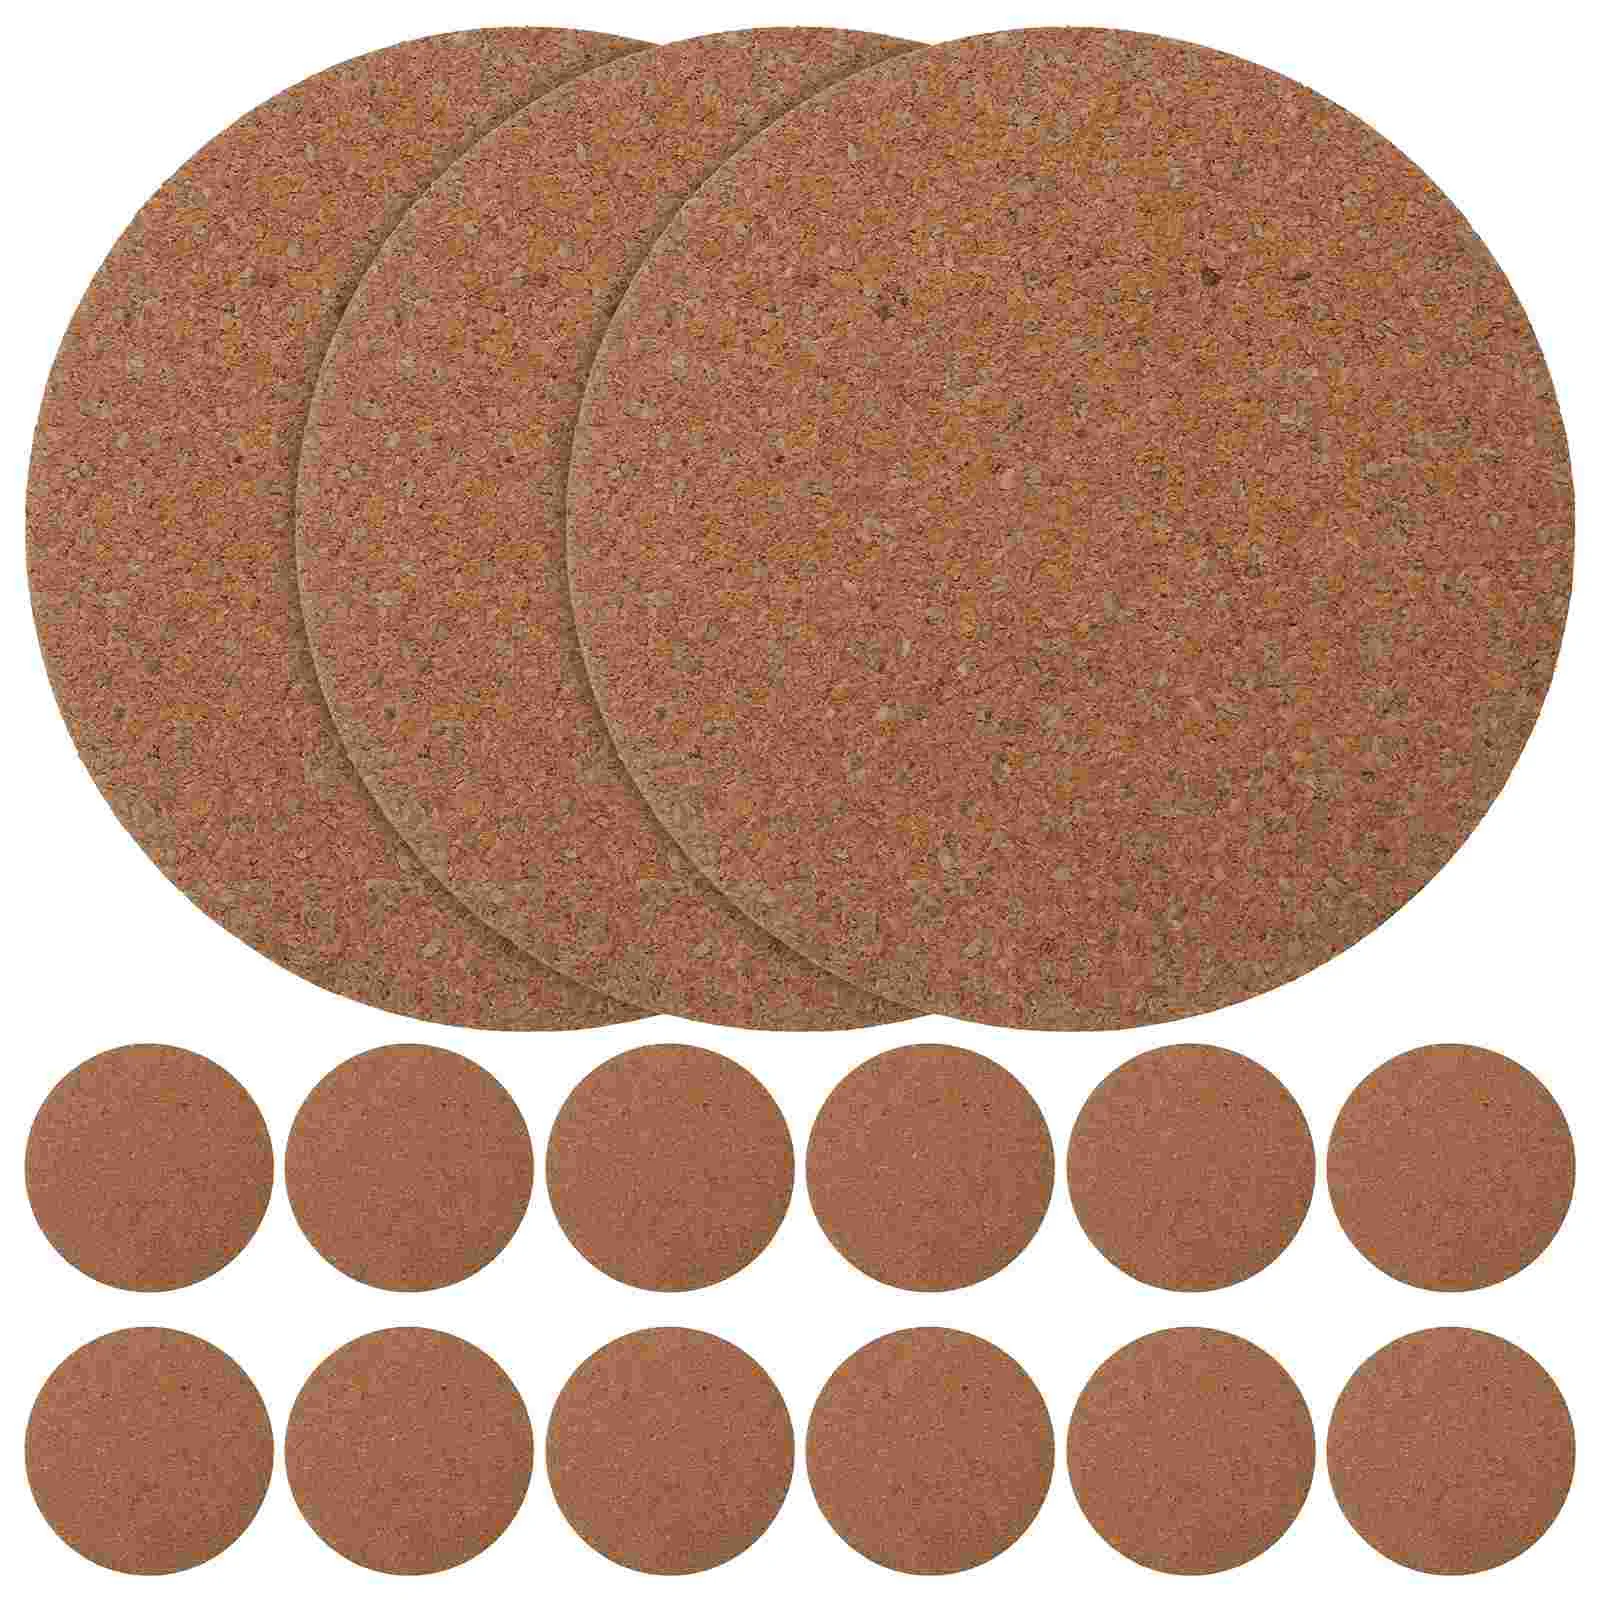 

30pcs Reusable Coasters Cork Coasters Drink Coasters Office Cup Mats Painting Coasters